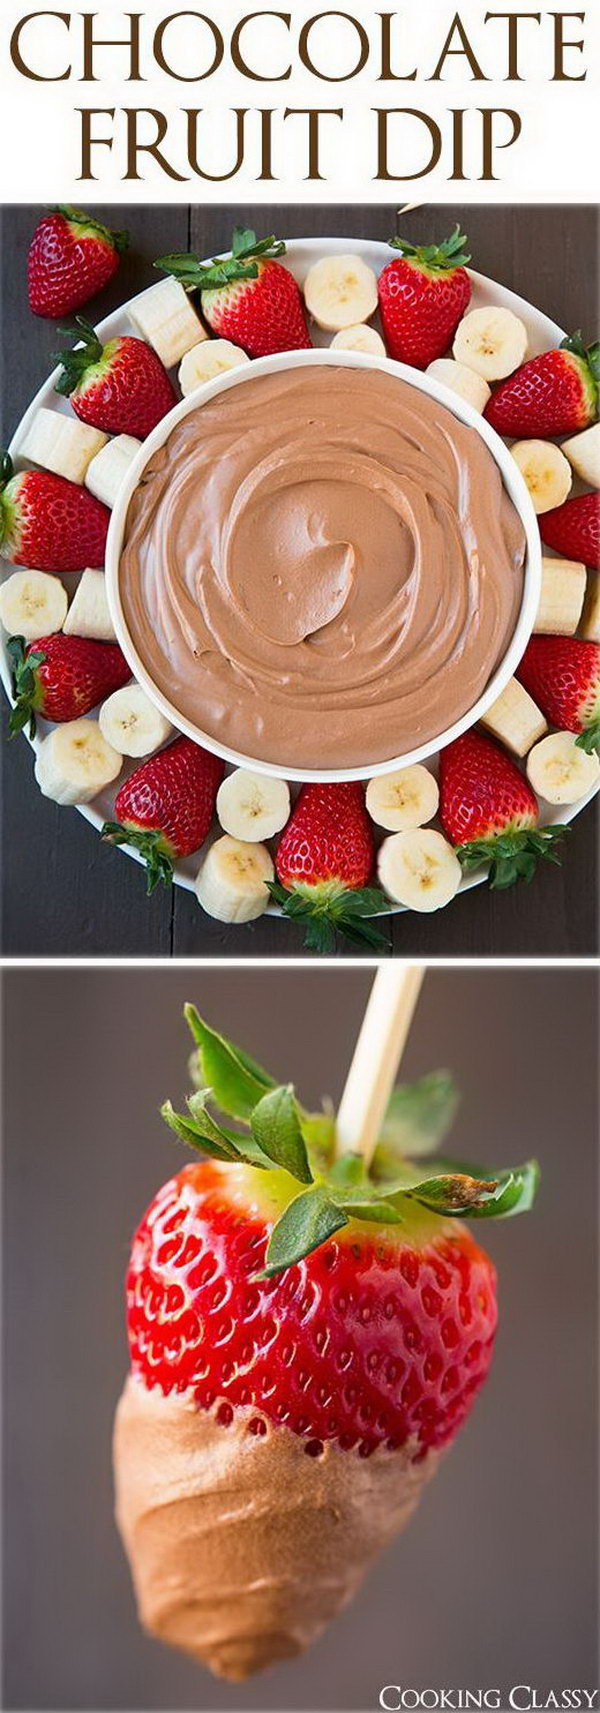 Chocolate Fruit Dip. Use electric hand mixer to whip cream, powder sugar, cocoa powder and cream cheese for good complement to dip bananas and strawberries for a sweet creamy flavor. It can't be better to celebrate your kid's birthday party. 